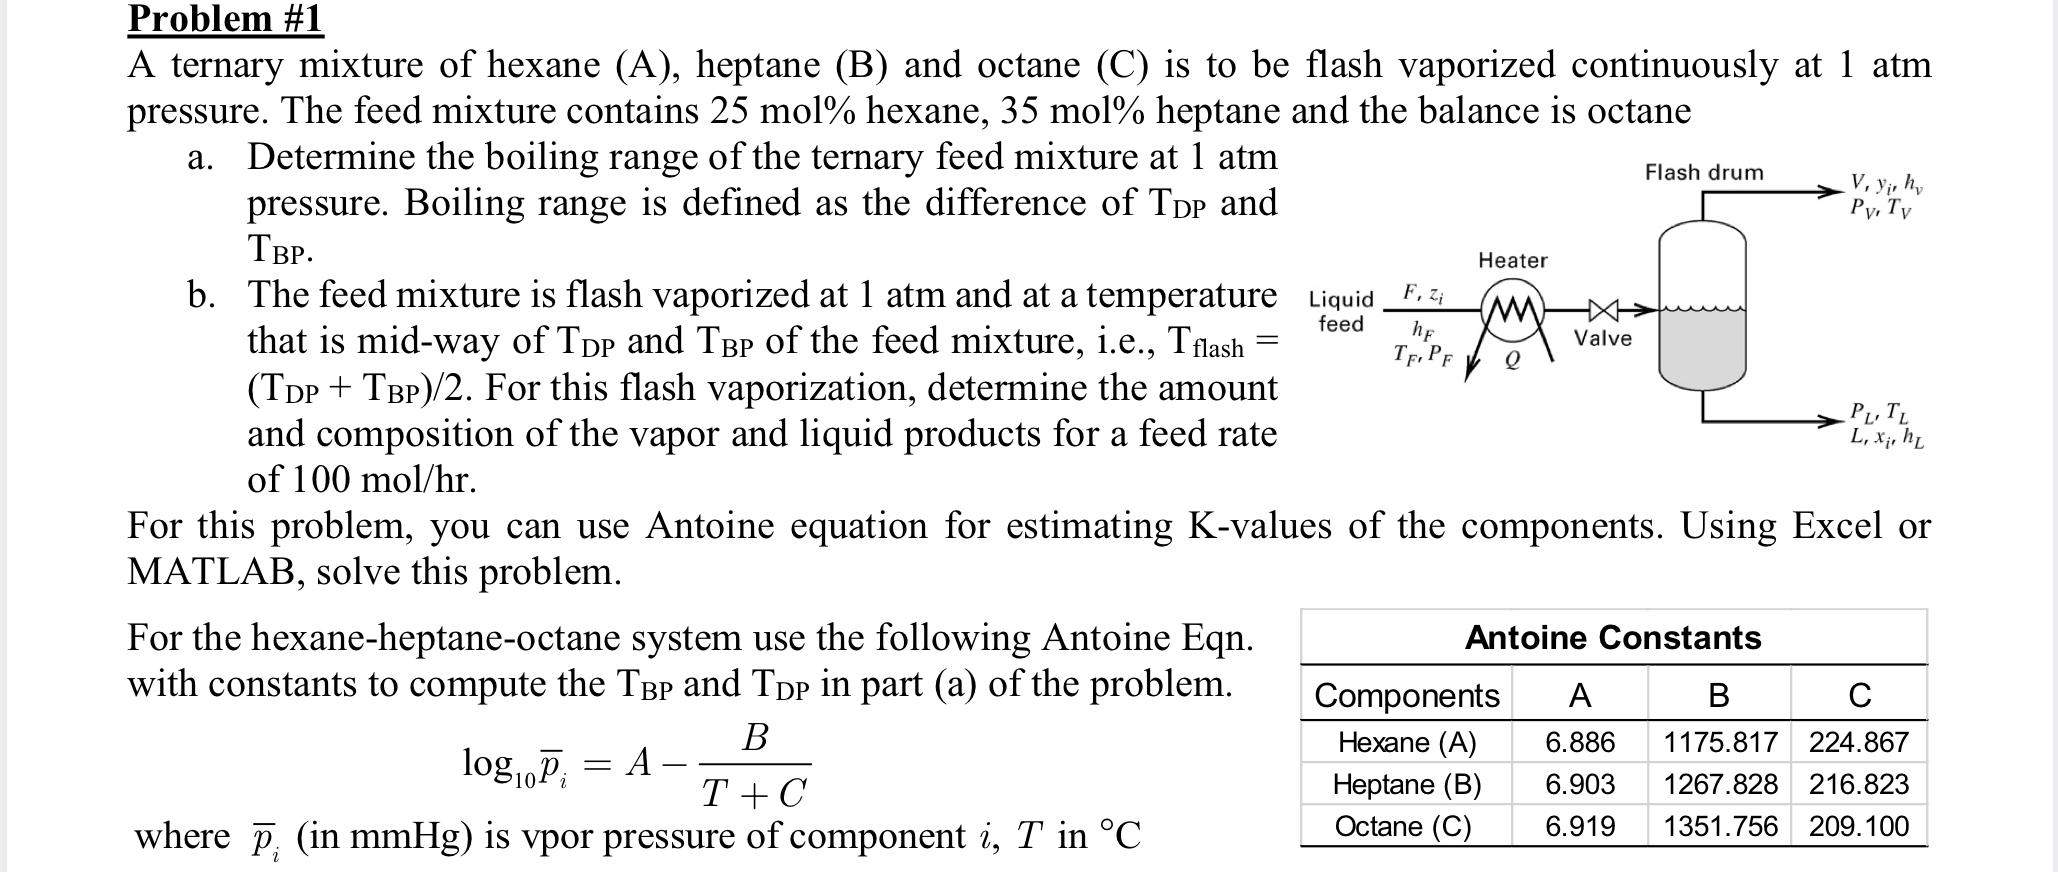 Problem #1 A ternary mixture of hexane (A), heptane (B) and octane (C) is to be flash vaporized continuously